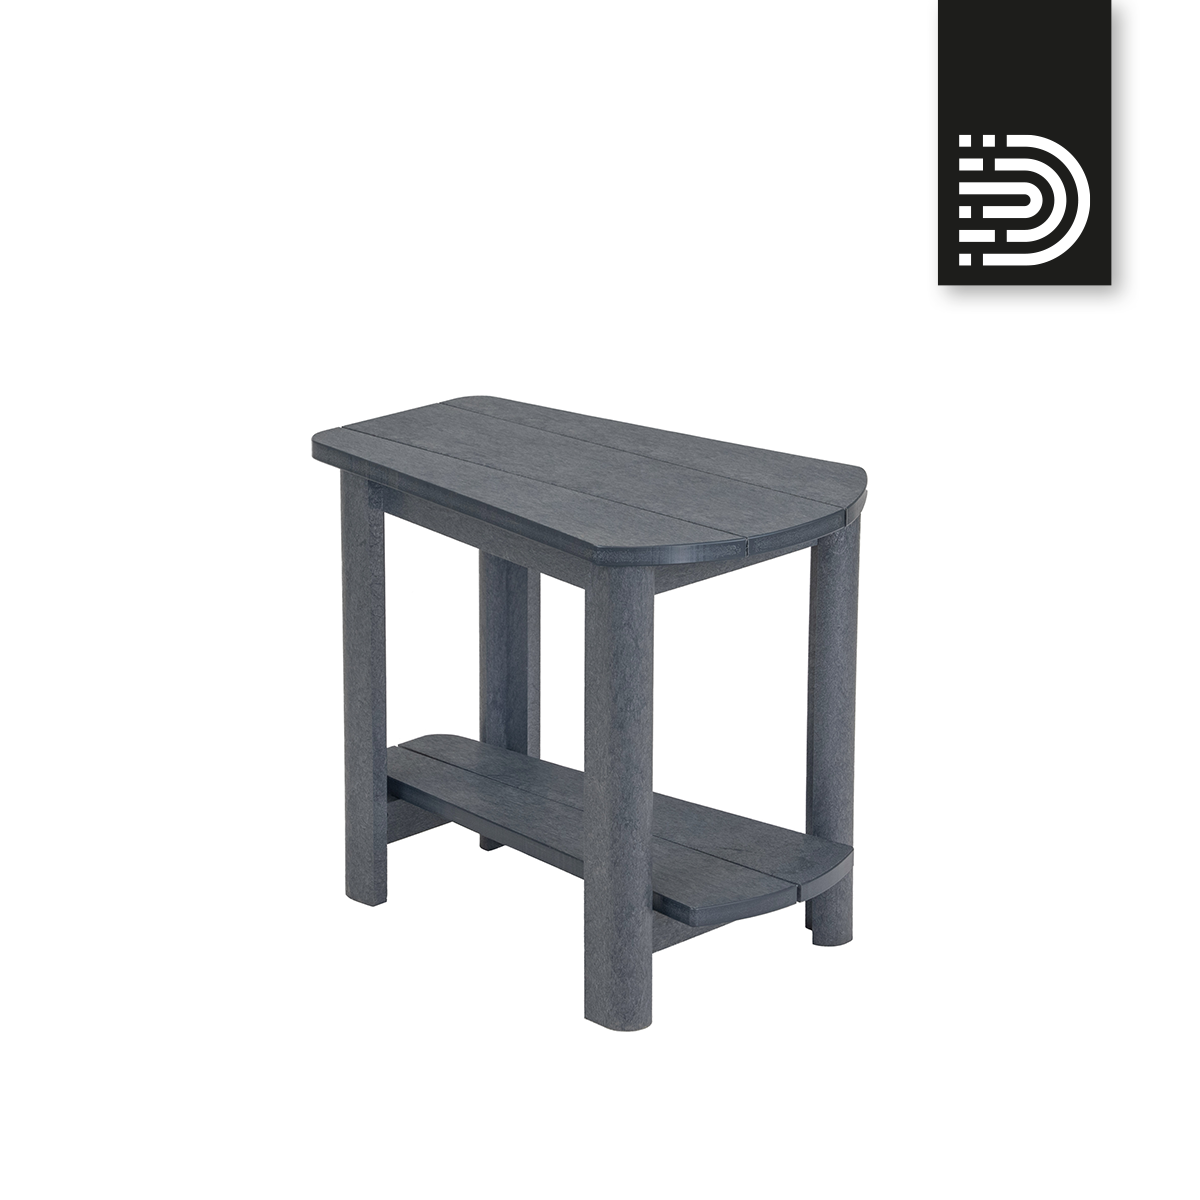 T04 Addy Side Table - Slate gray 18